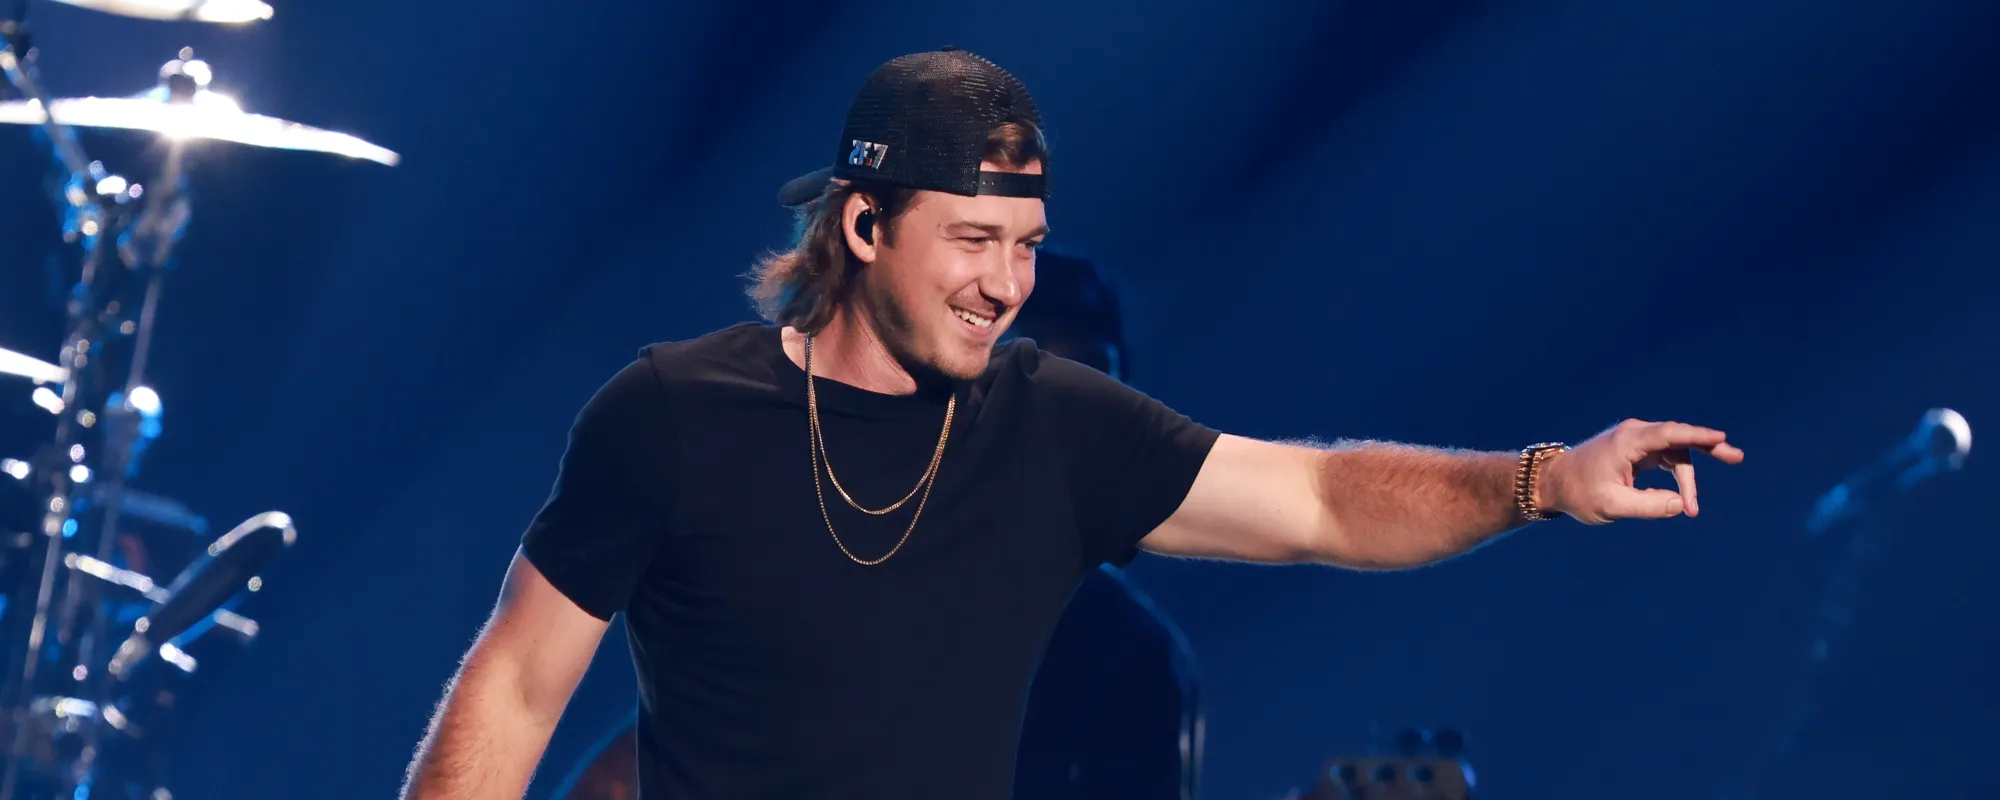 The Meaning Behind the No. 1 Song Morgan Wallen Wrote For His Mother